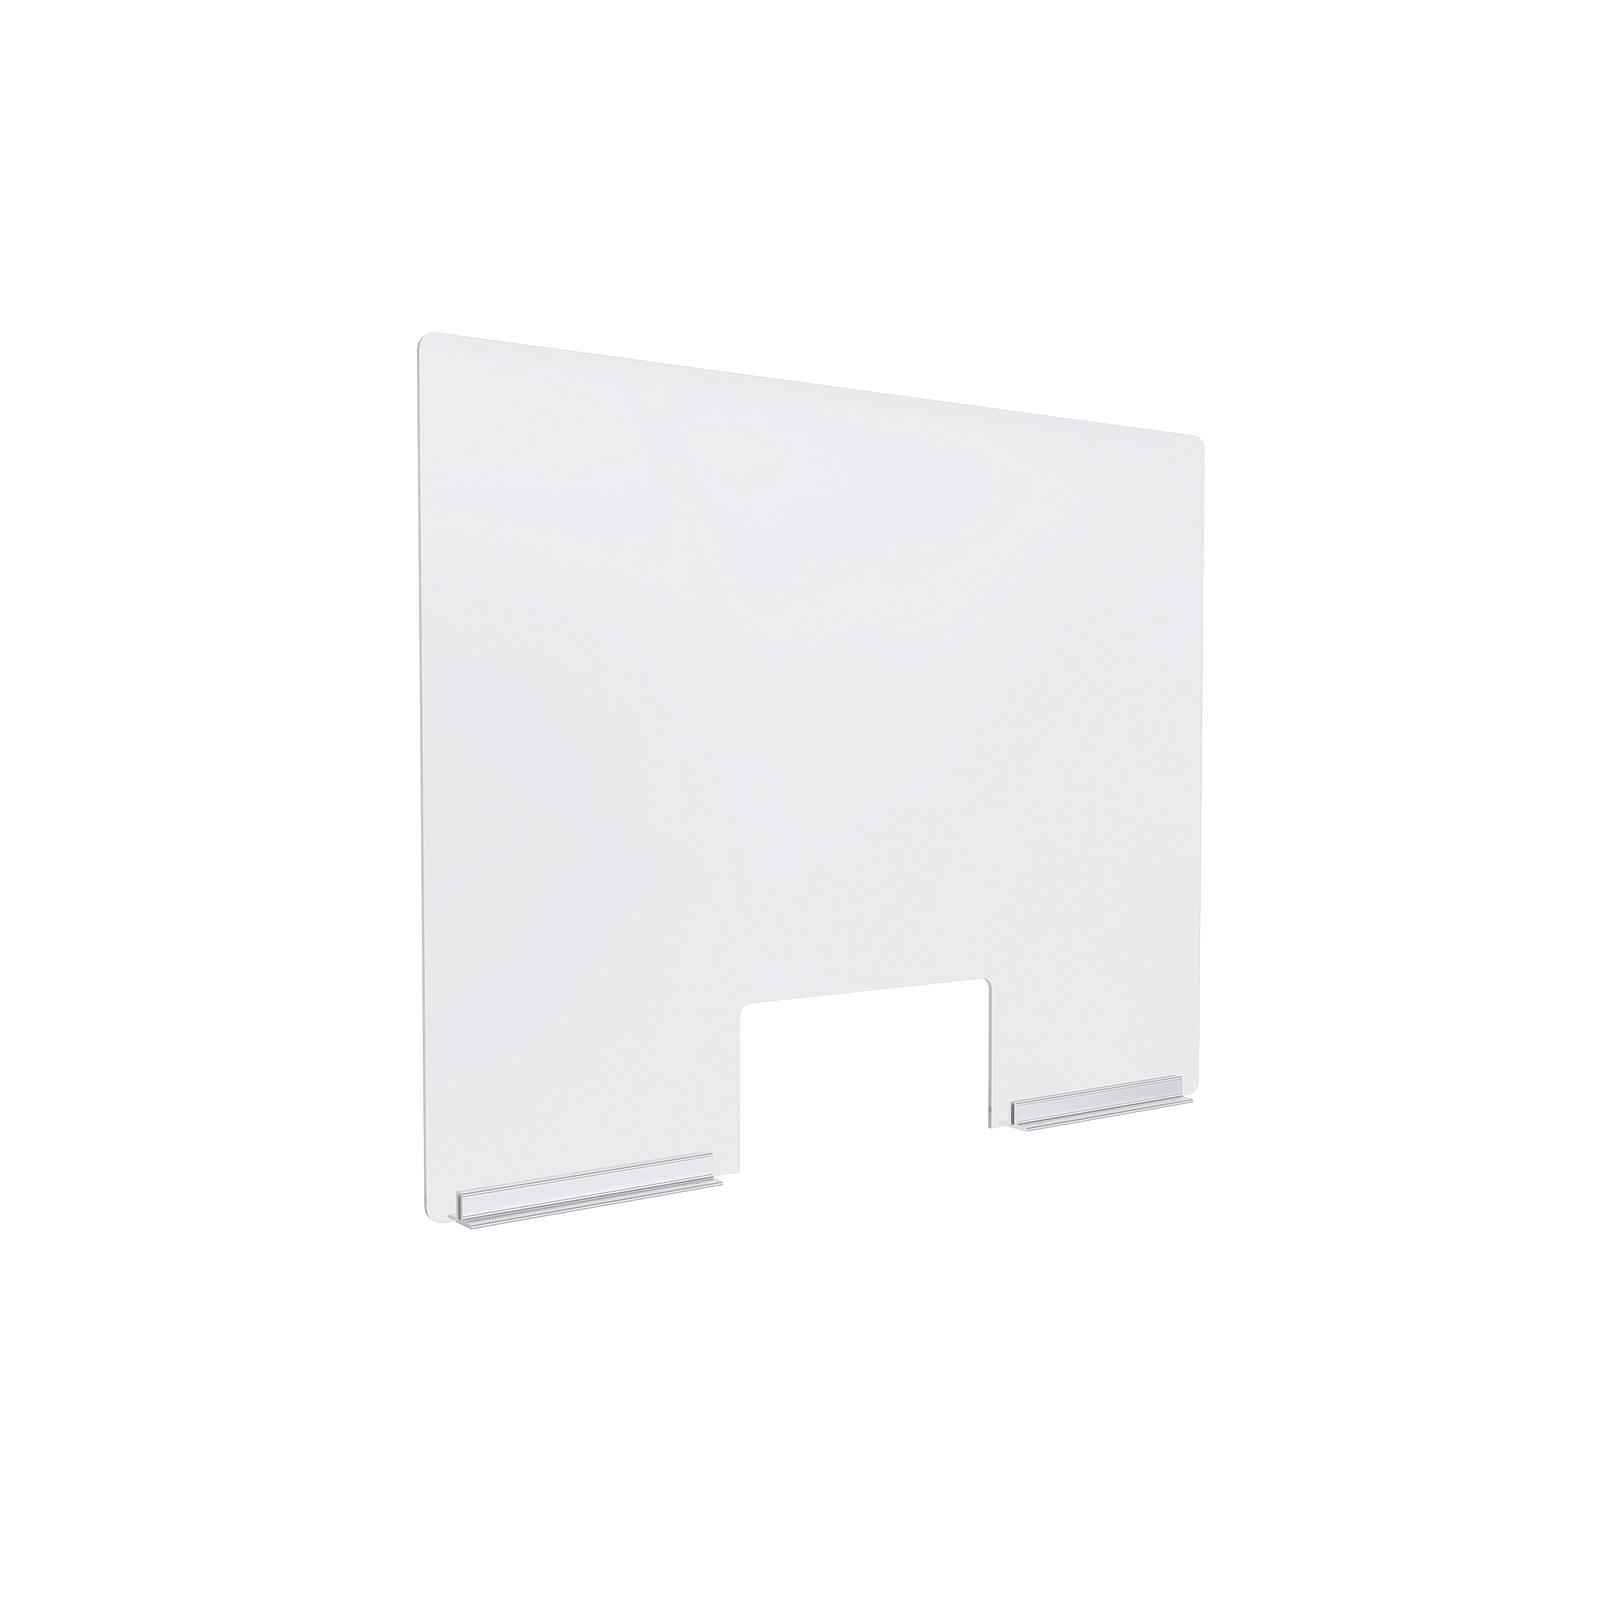 Clear Acrylic Sneeze Guard 30'' Wide x 23-1/2'' Tall (10'' x 5'' Cut Out), with (2) 8'' Clear Anodized Aluminum Channel Mounts